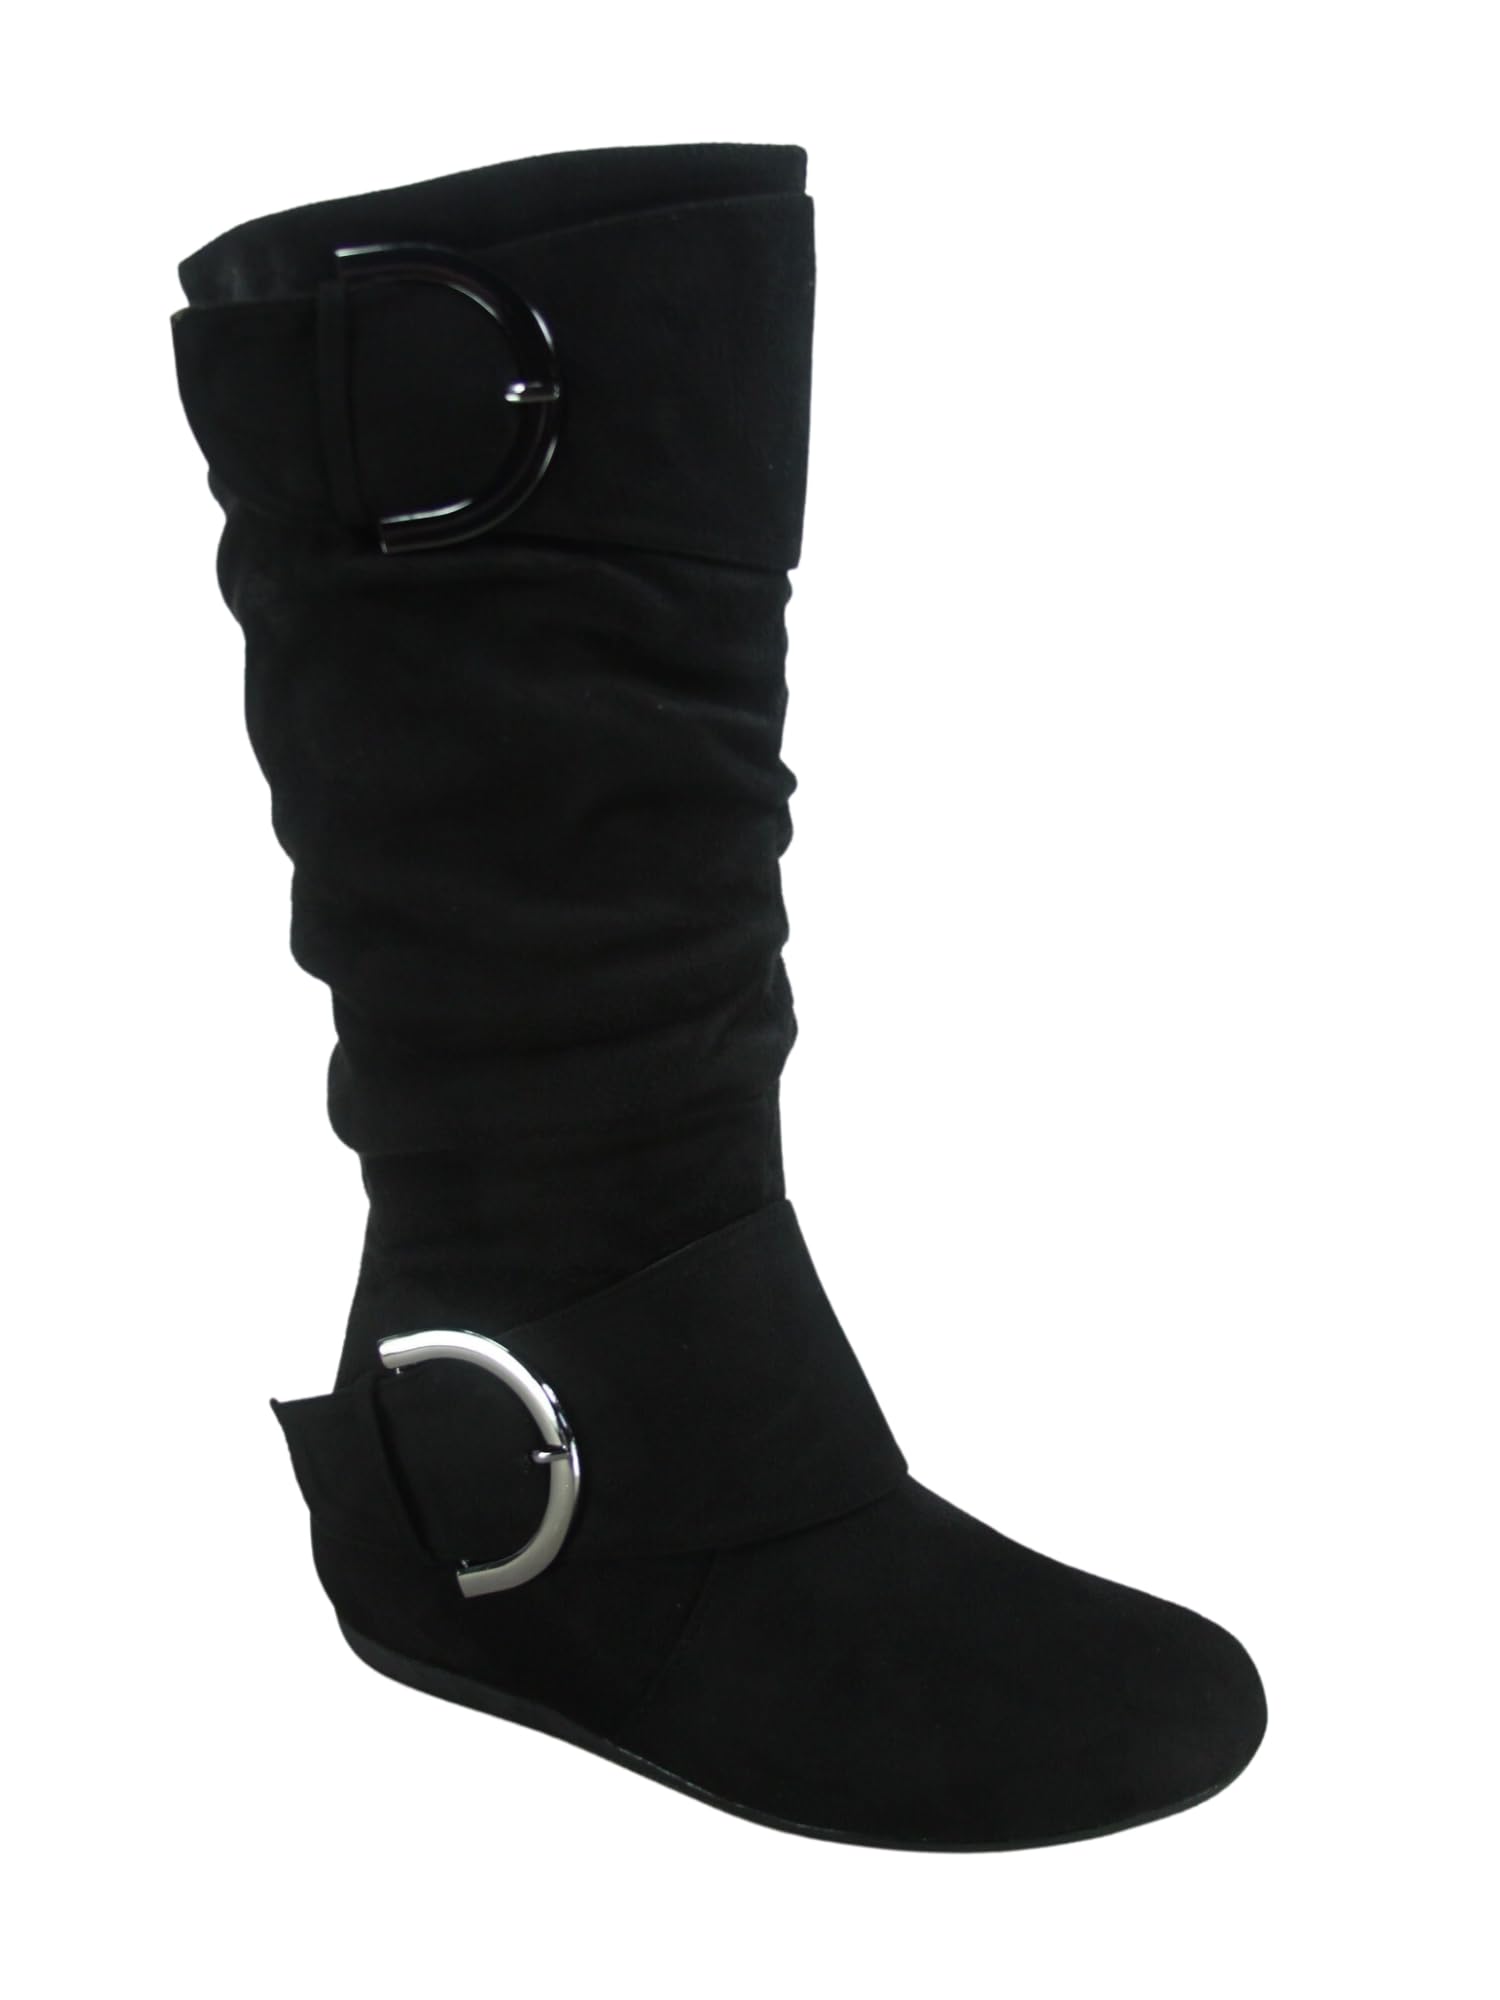 TZ Zone-38 Women's Closed Round Toe Flat Heel Buckle Slouchy Mid-Calf Casual Boots